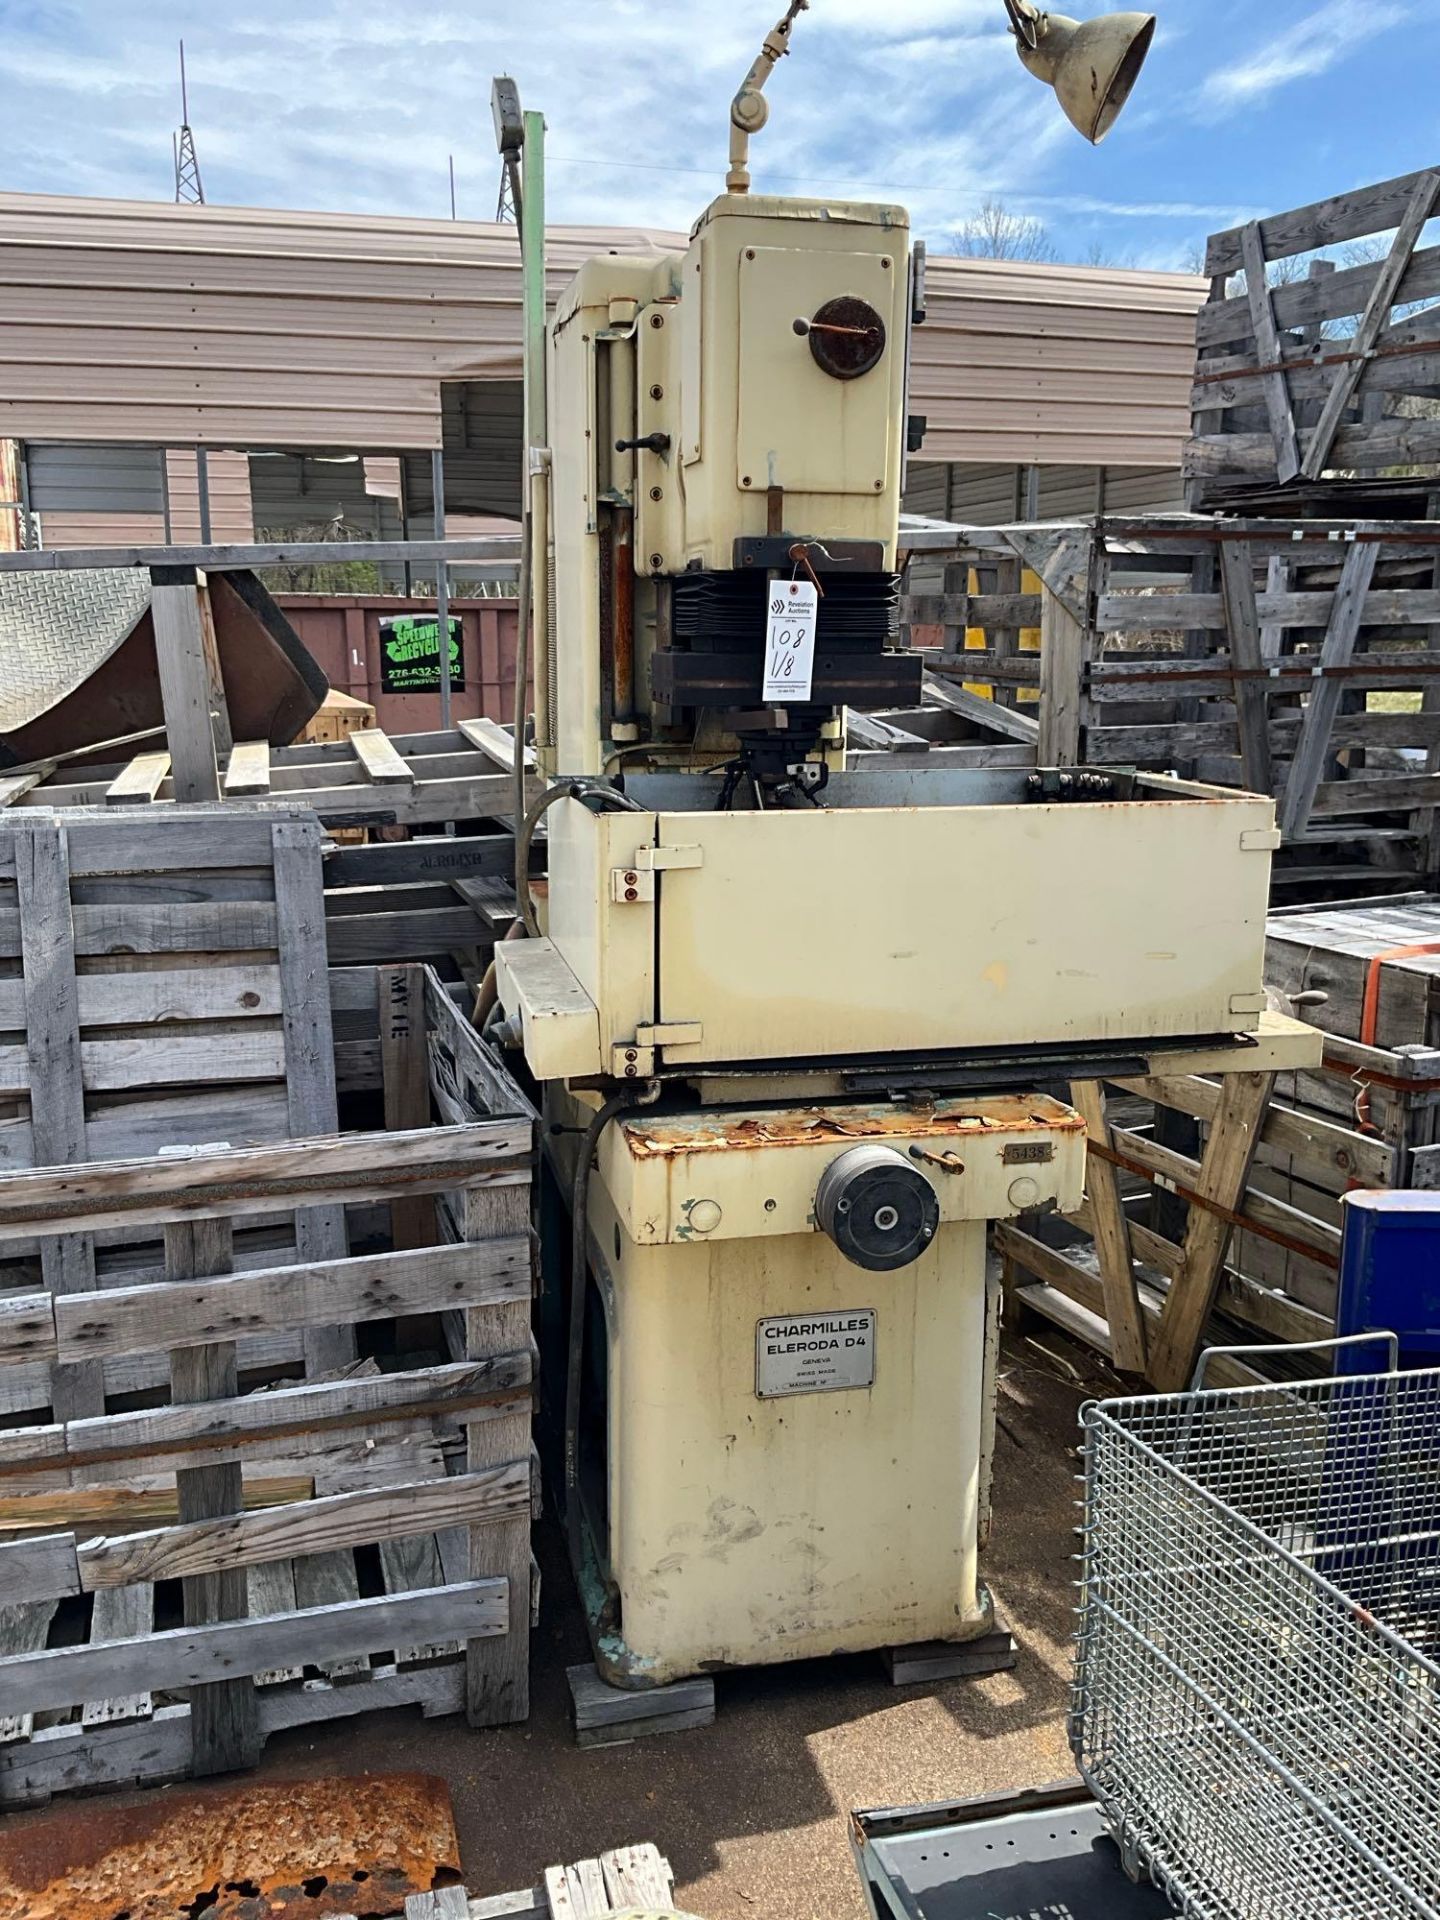 NON WORKING MACHINES FOR PARTS, ASSORTED MACHINE PARTS